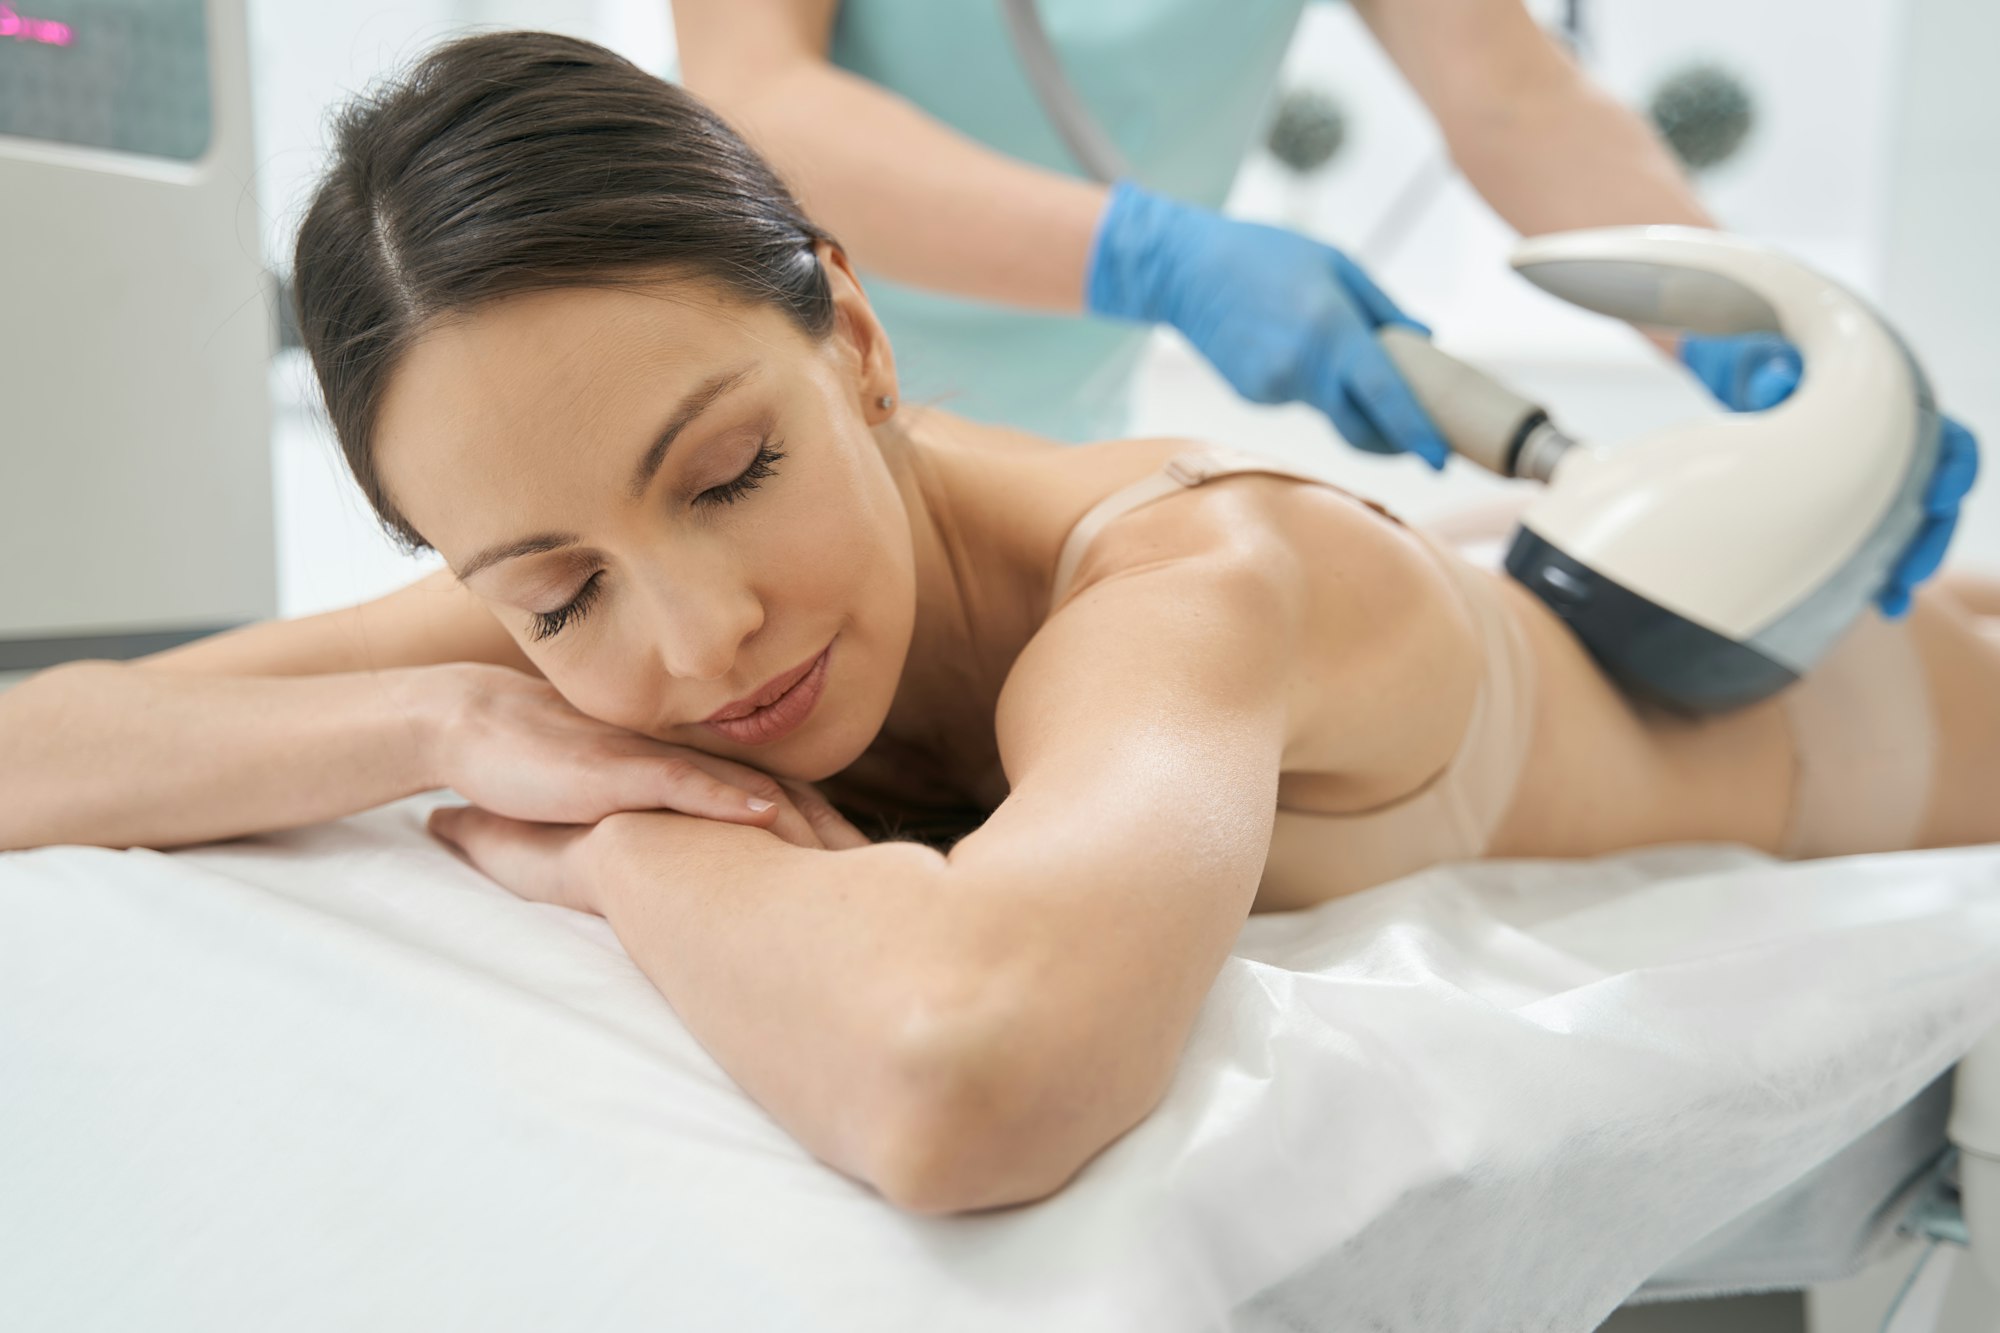 Woman with closed eyes taking pleasure in vela shape treatment